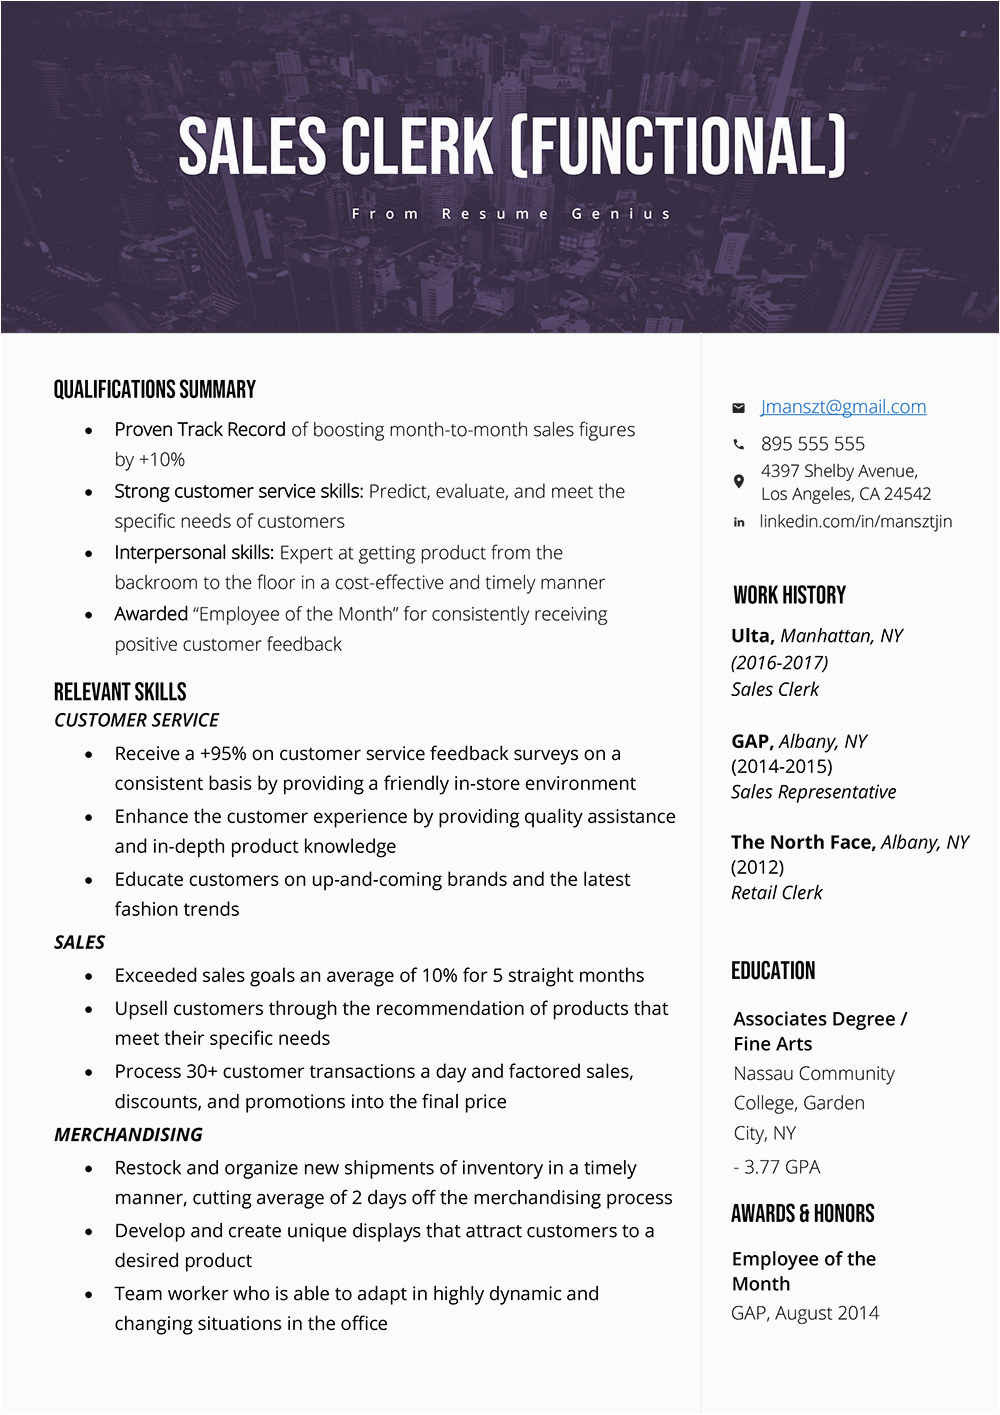 Resume Sample with Qualifications and Skills How to Write A Qualifications Summary